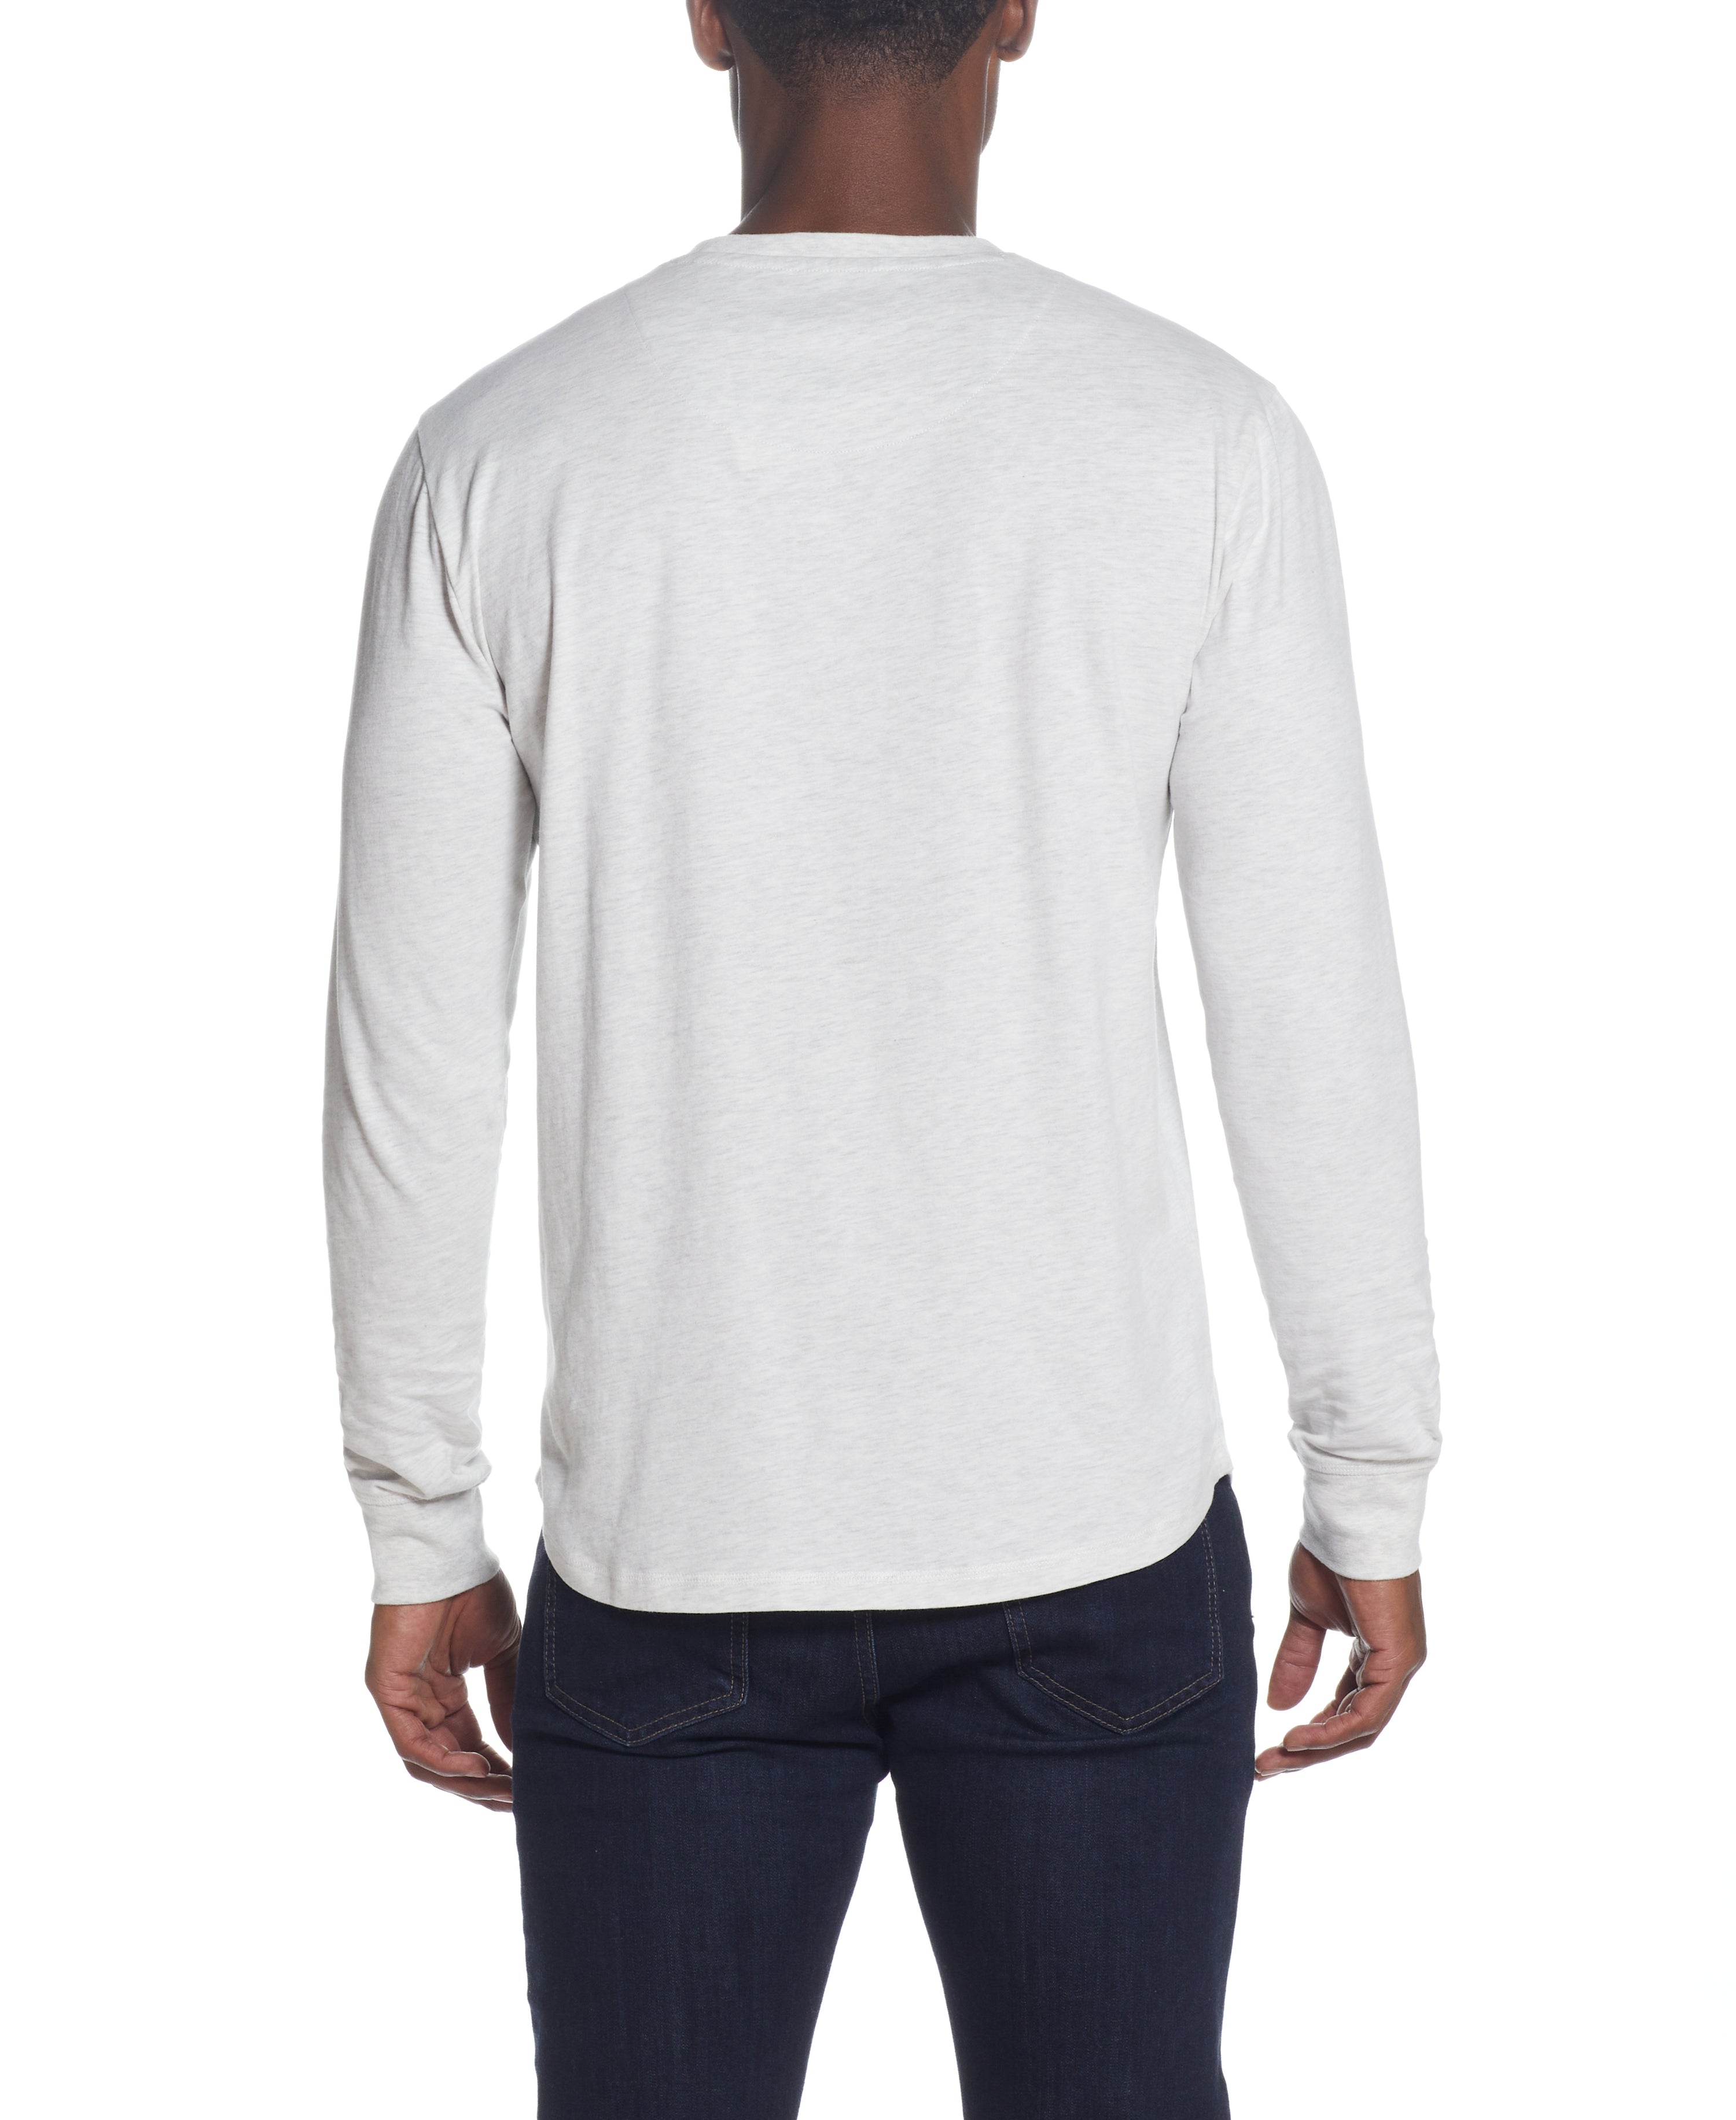 LONG SLEEVE BRUSHED JERSEY CREW in OATMEAL